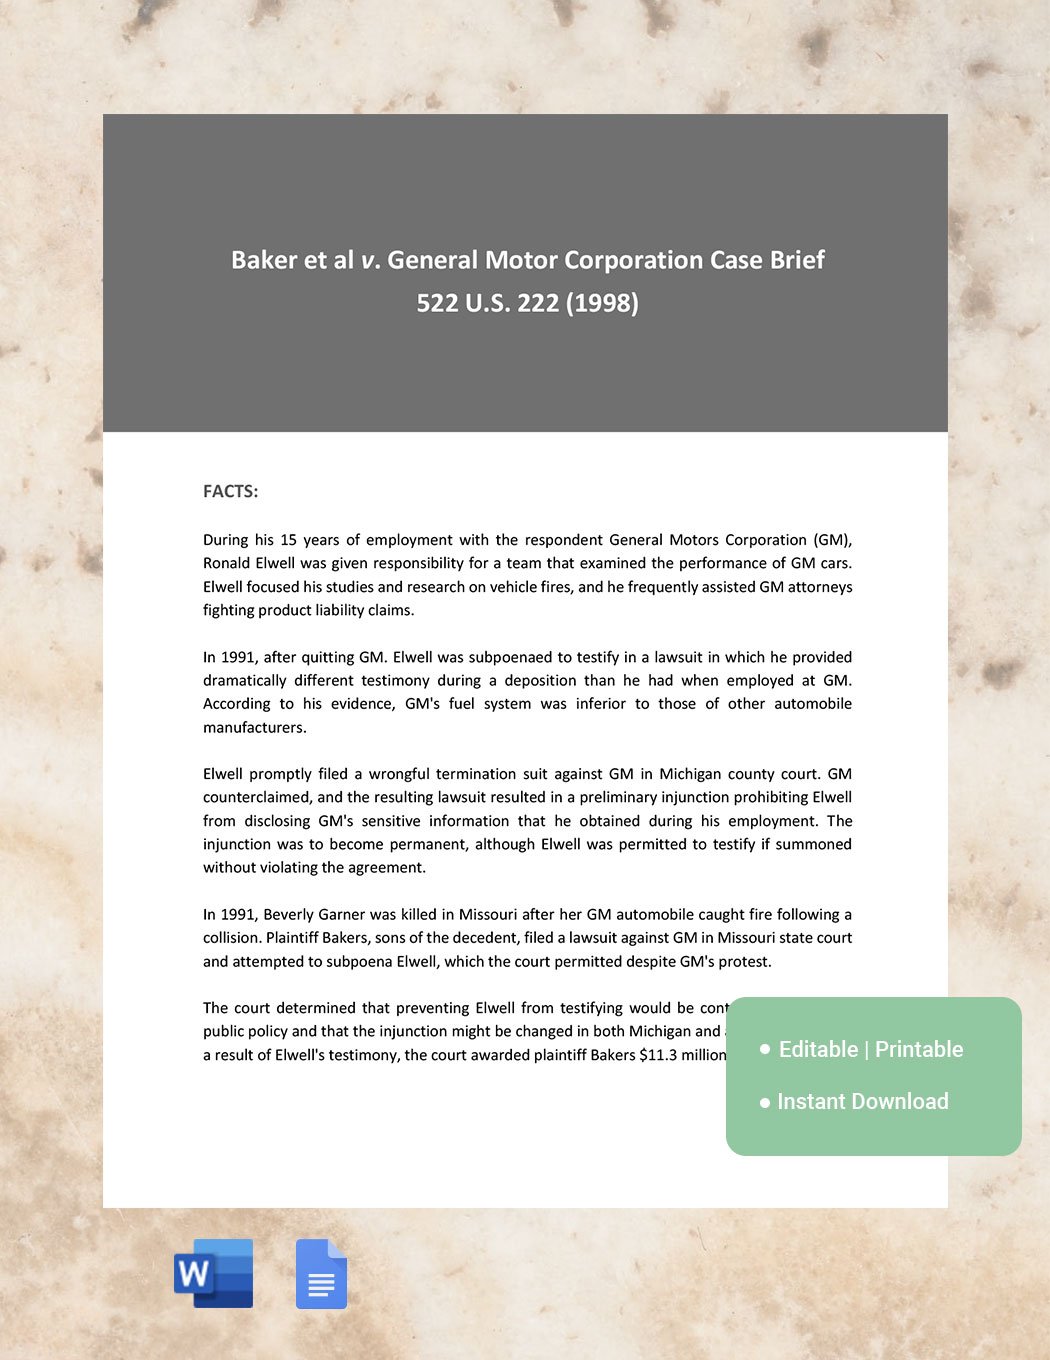 Business Case Brief Template in Word, Google Docs